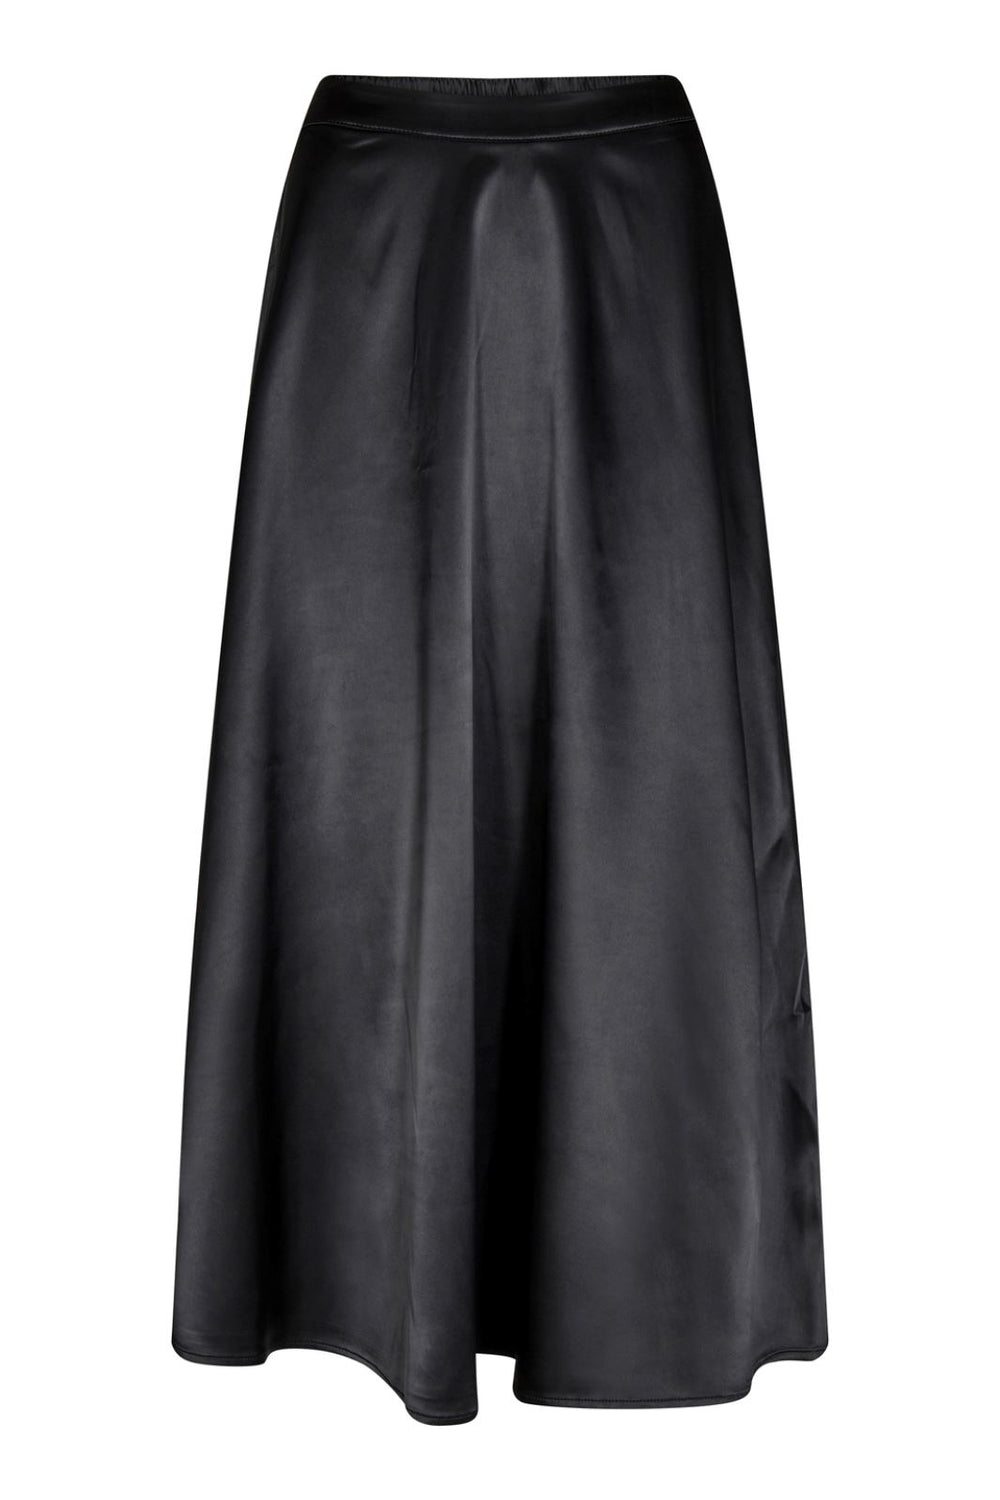 Co´couture - Livacc Sateen Skirt - 96 Black Nederdele 